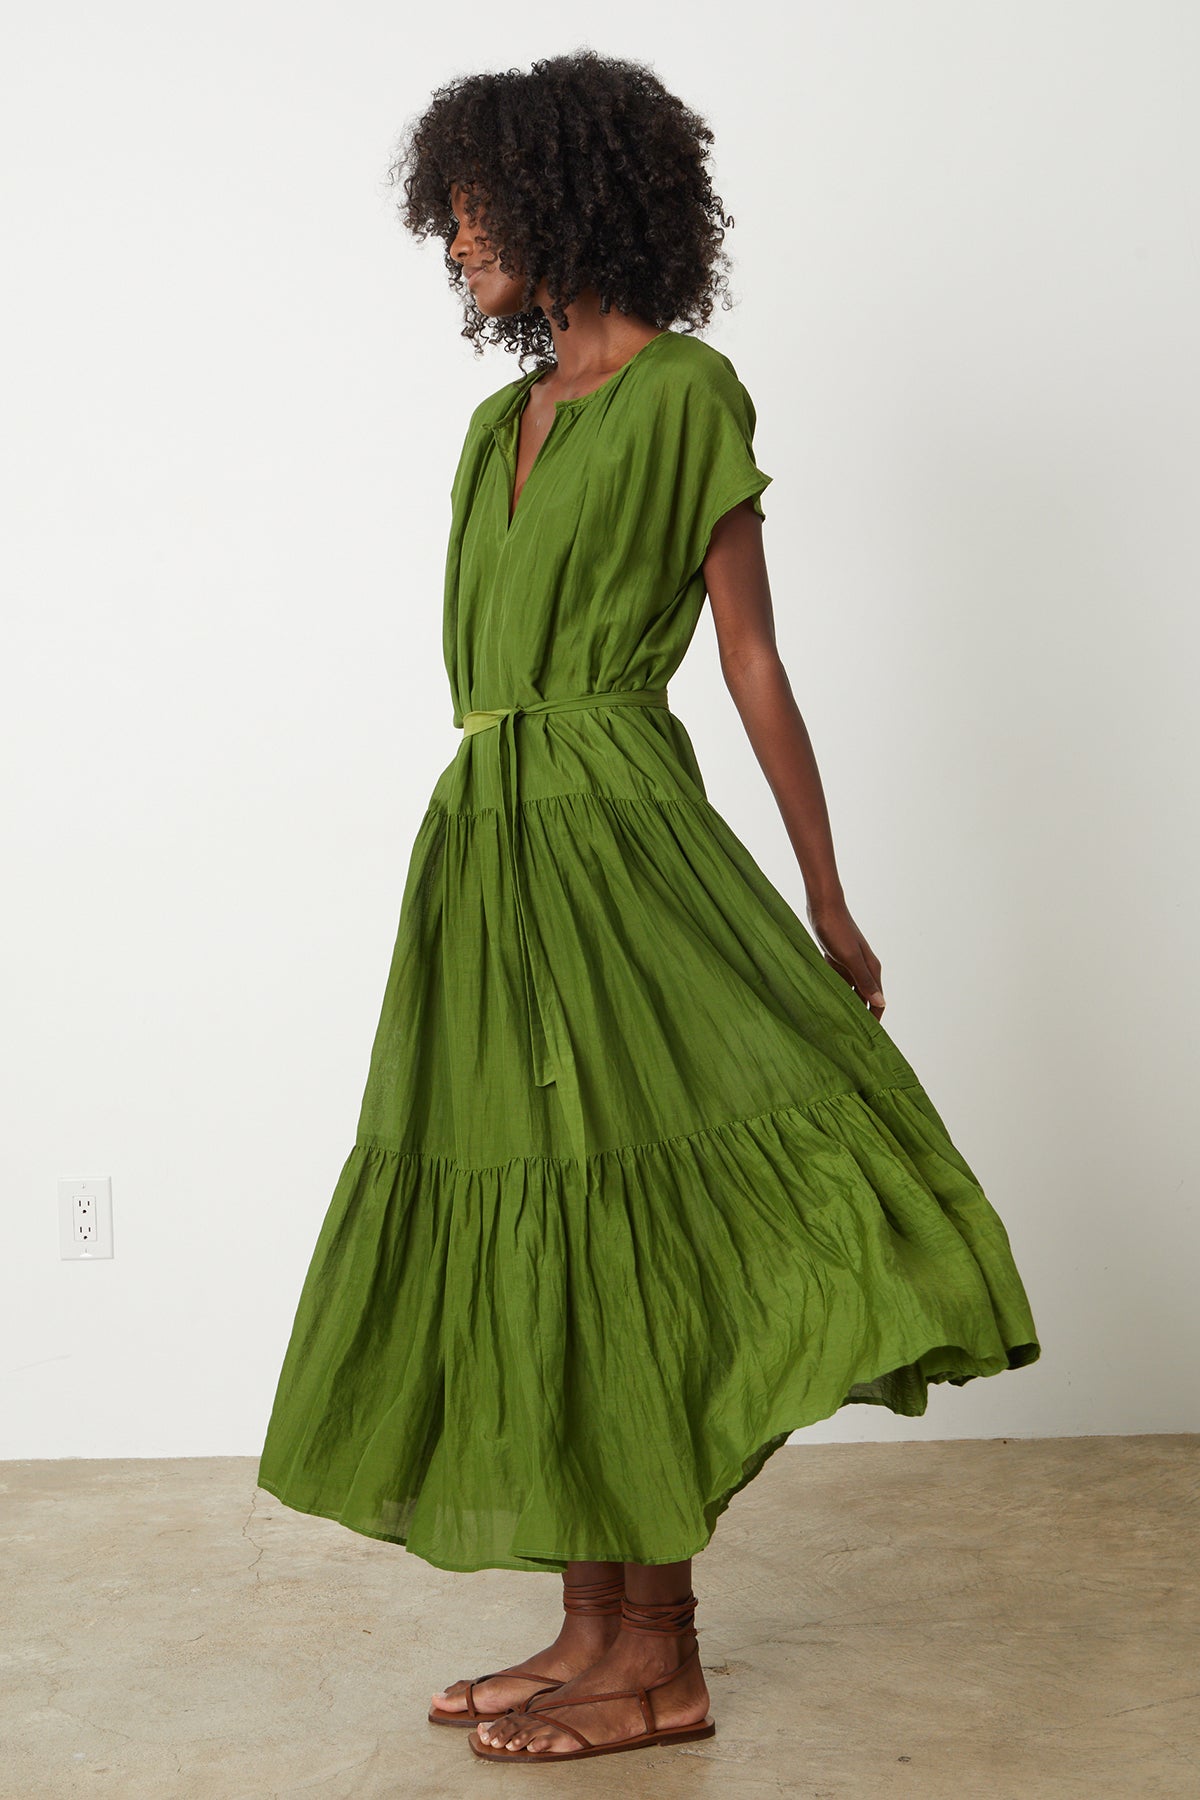 The model is wearing an ADA TIERED MAXI DRESS by Velvet by Graham & Spencer with ruffles.-26342688850113